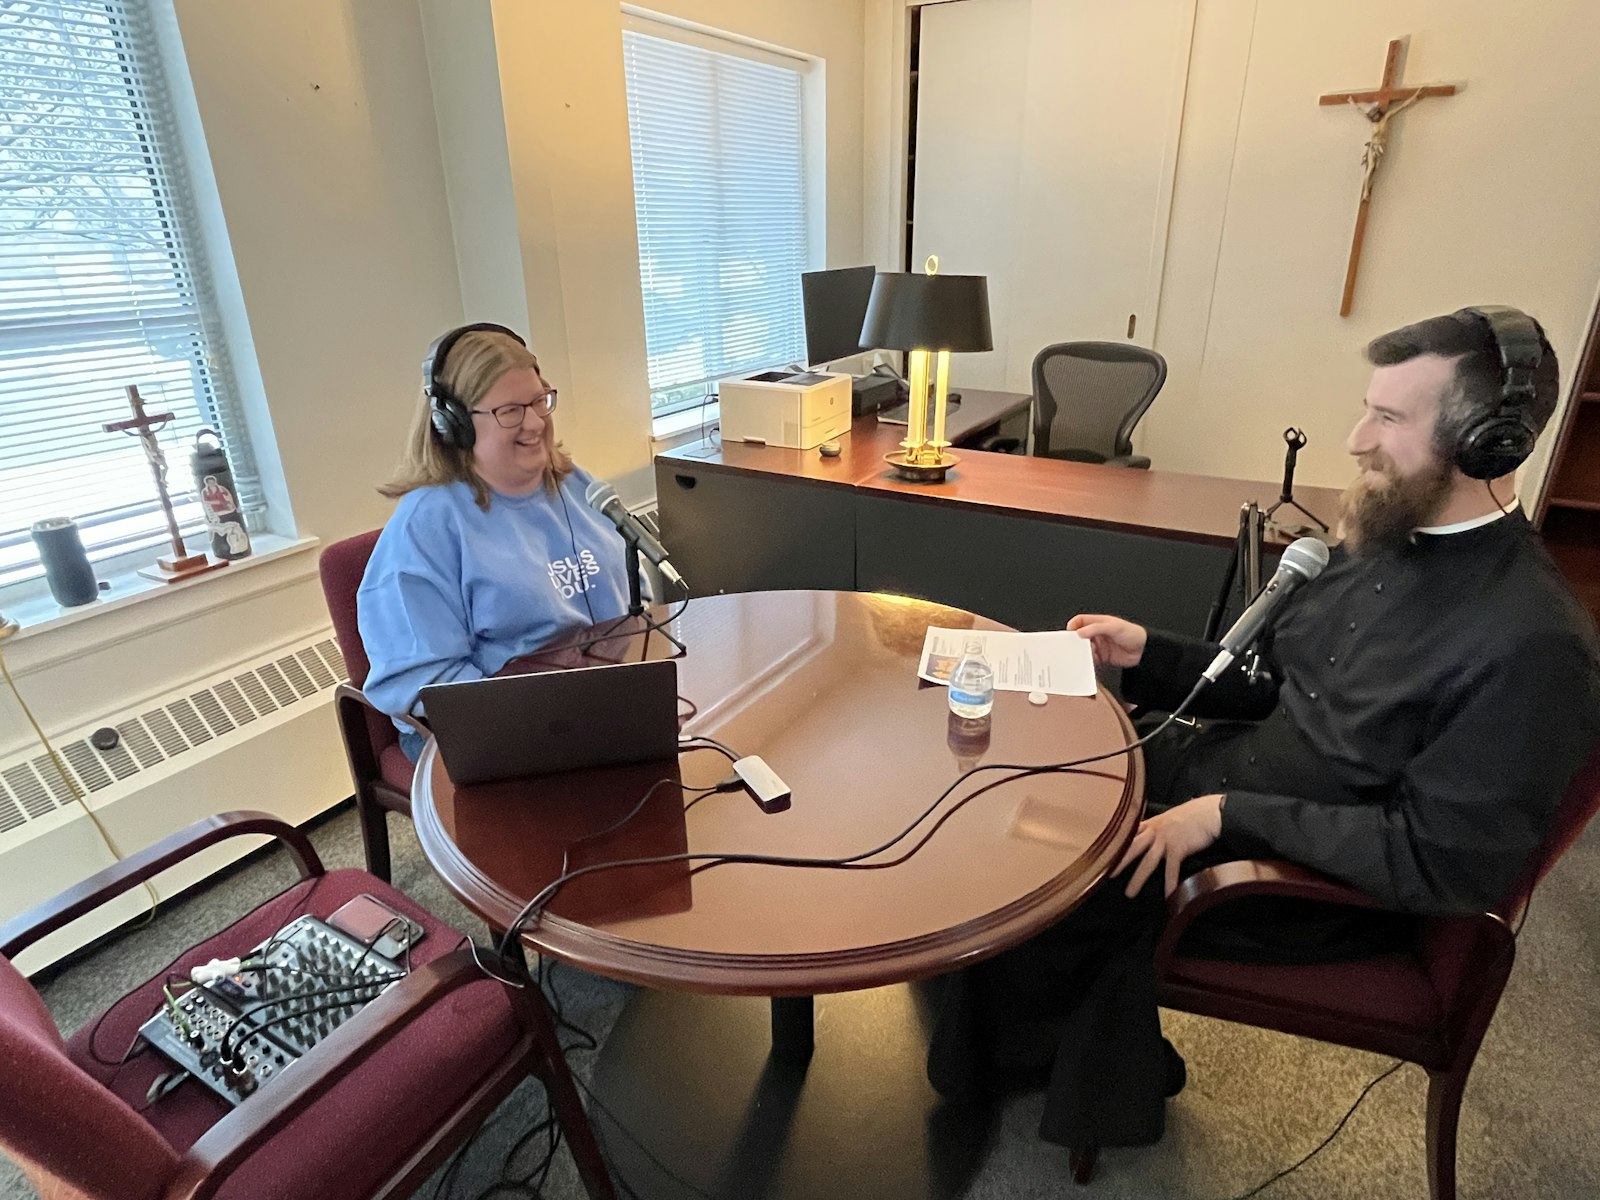 Tori Polhill, left, director of youth discipleship at Our Lady of Sorrows, records an episode of "Seek What's Above" with Fr. Derik Peterman. (Karla Dorweiler | Special to Detroit Catholic)